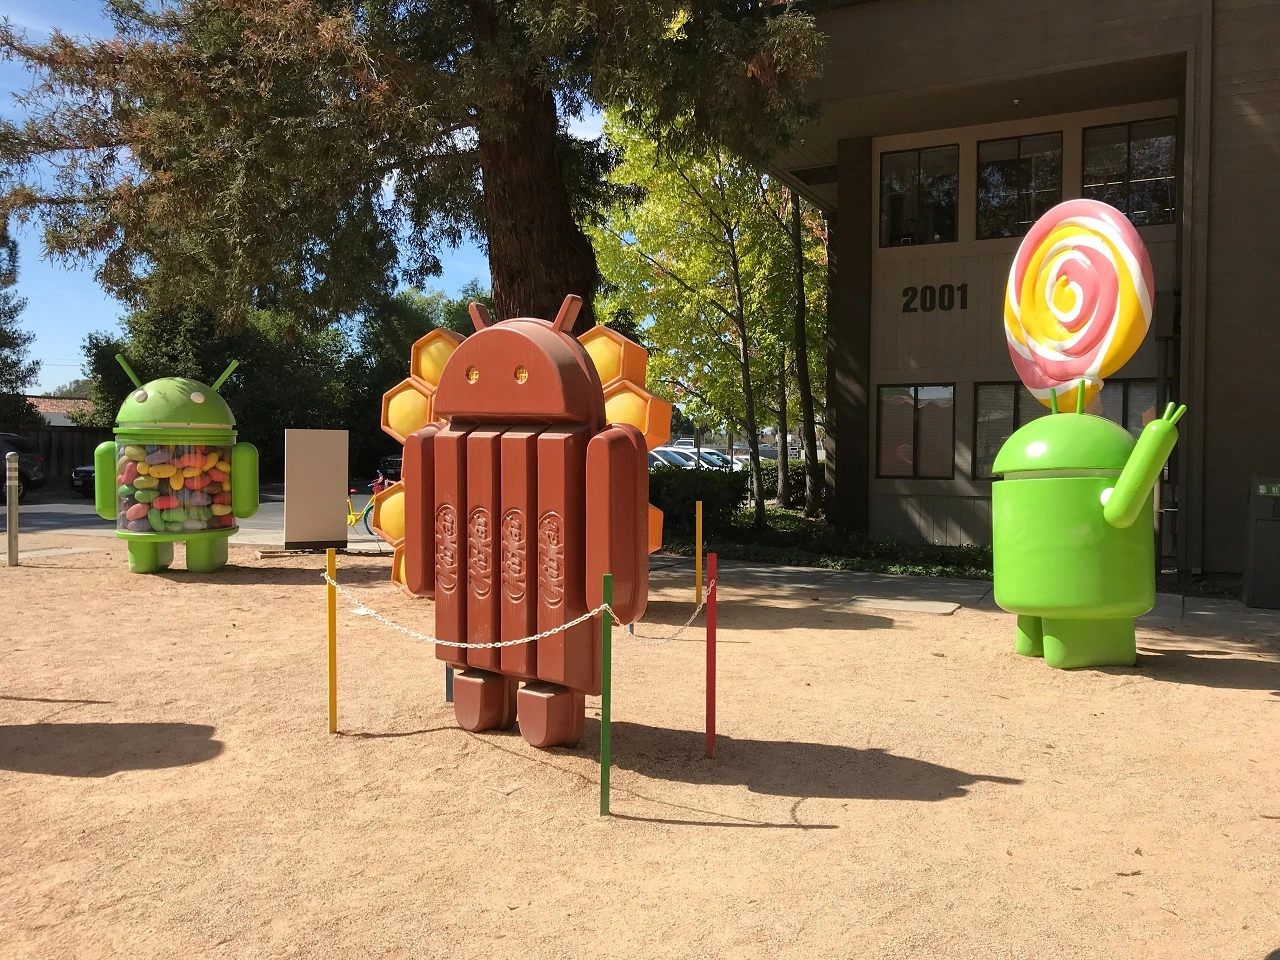 Google Introduce New Features “Extension Software Developer Kit” For Android Users.